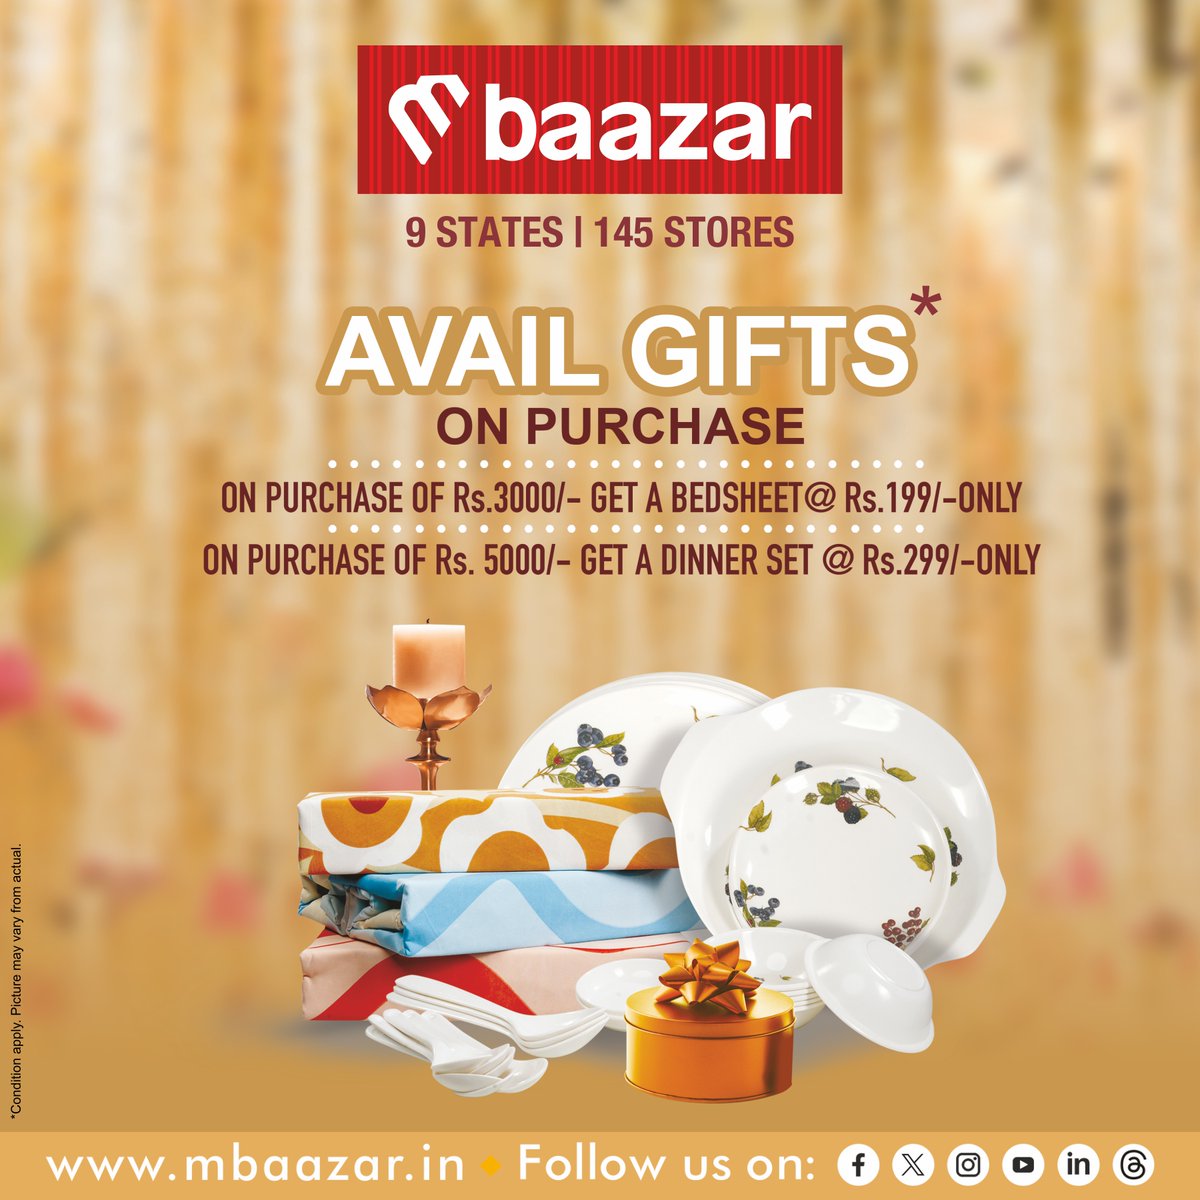 The best thing about getting married is shopping, and we are ready to make your shaadi shopping a little more exciting and rewarding.

*T&C applied
#mbaazar #thefashionstore #shoppingatmbaazar #comfortableclothing #weddingseasonsale #shoppingdelights #gifts #giftsonpu